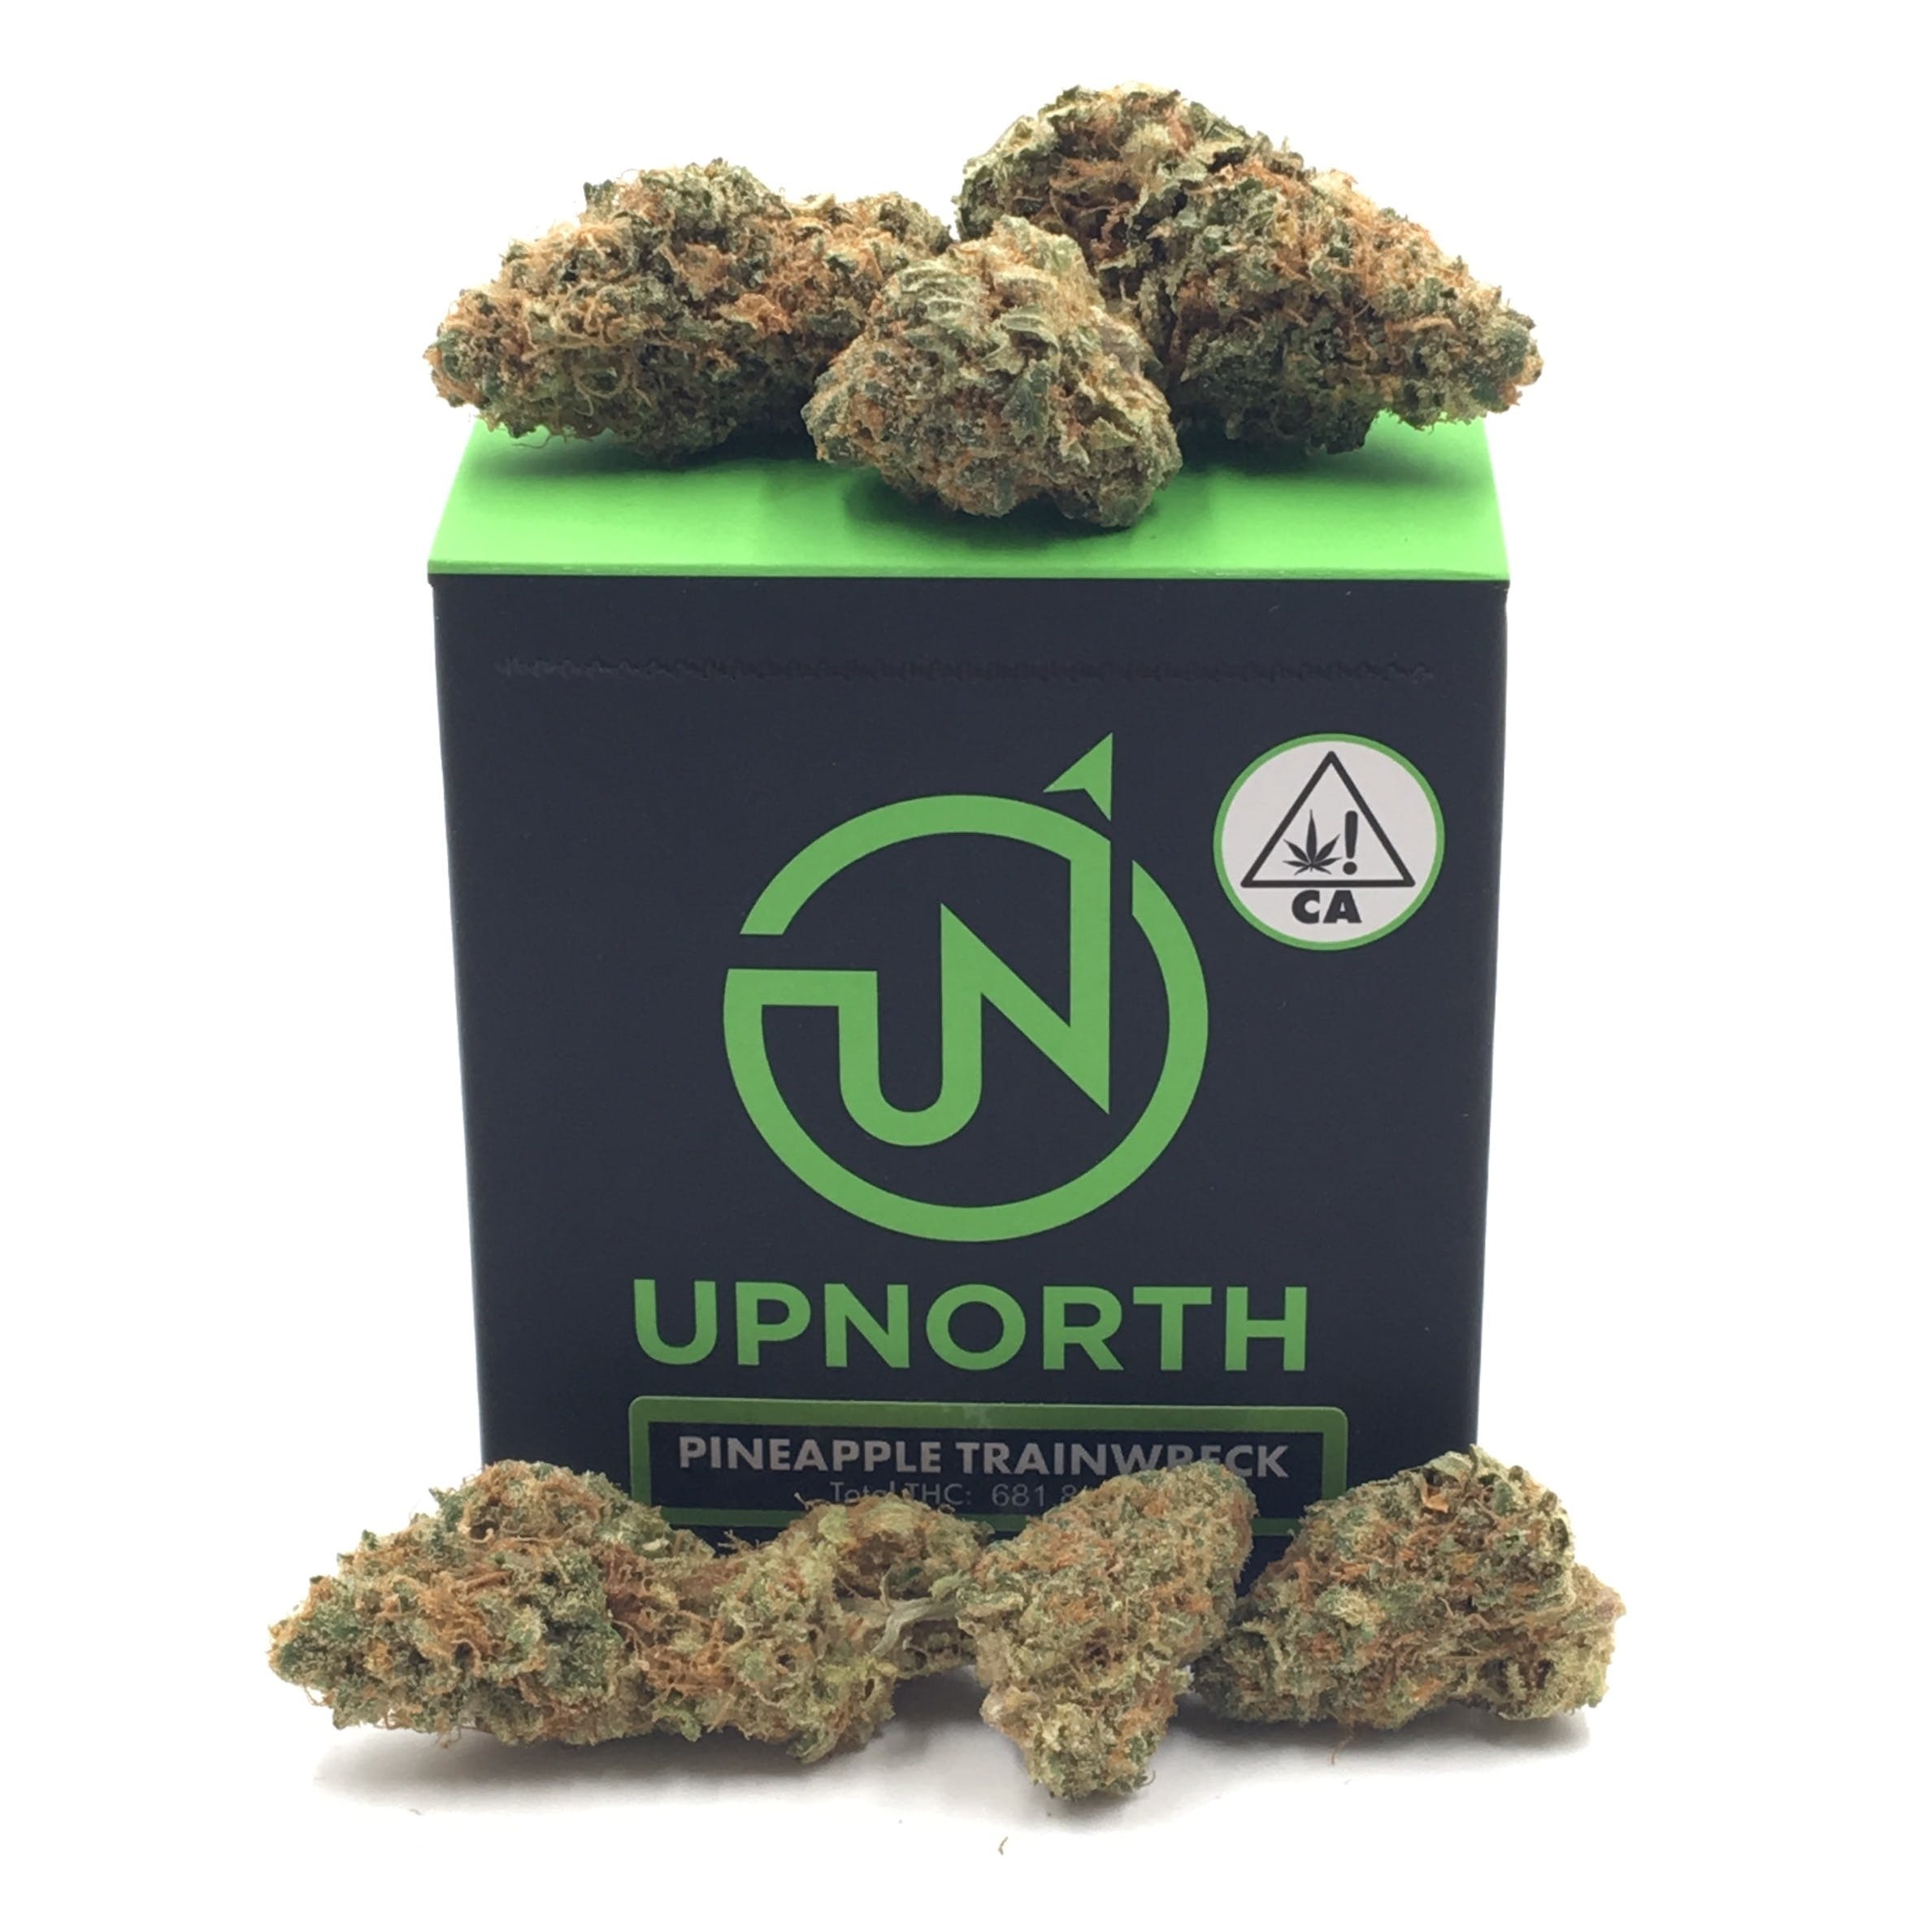 [1/8th] Pineapple Trainwreck - Up North